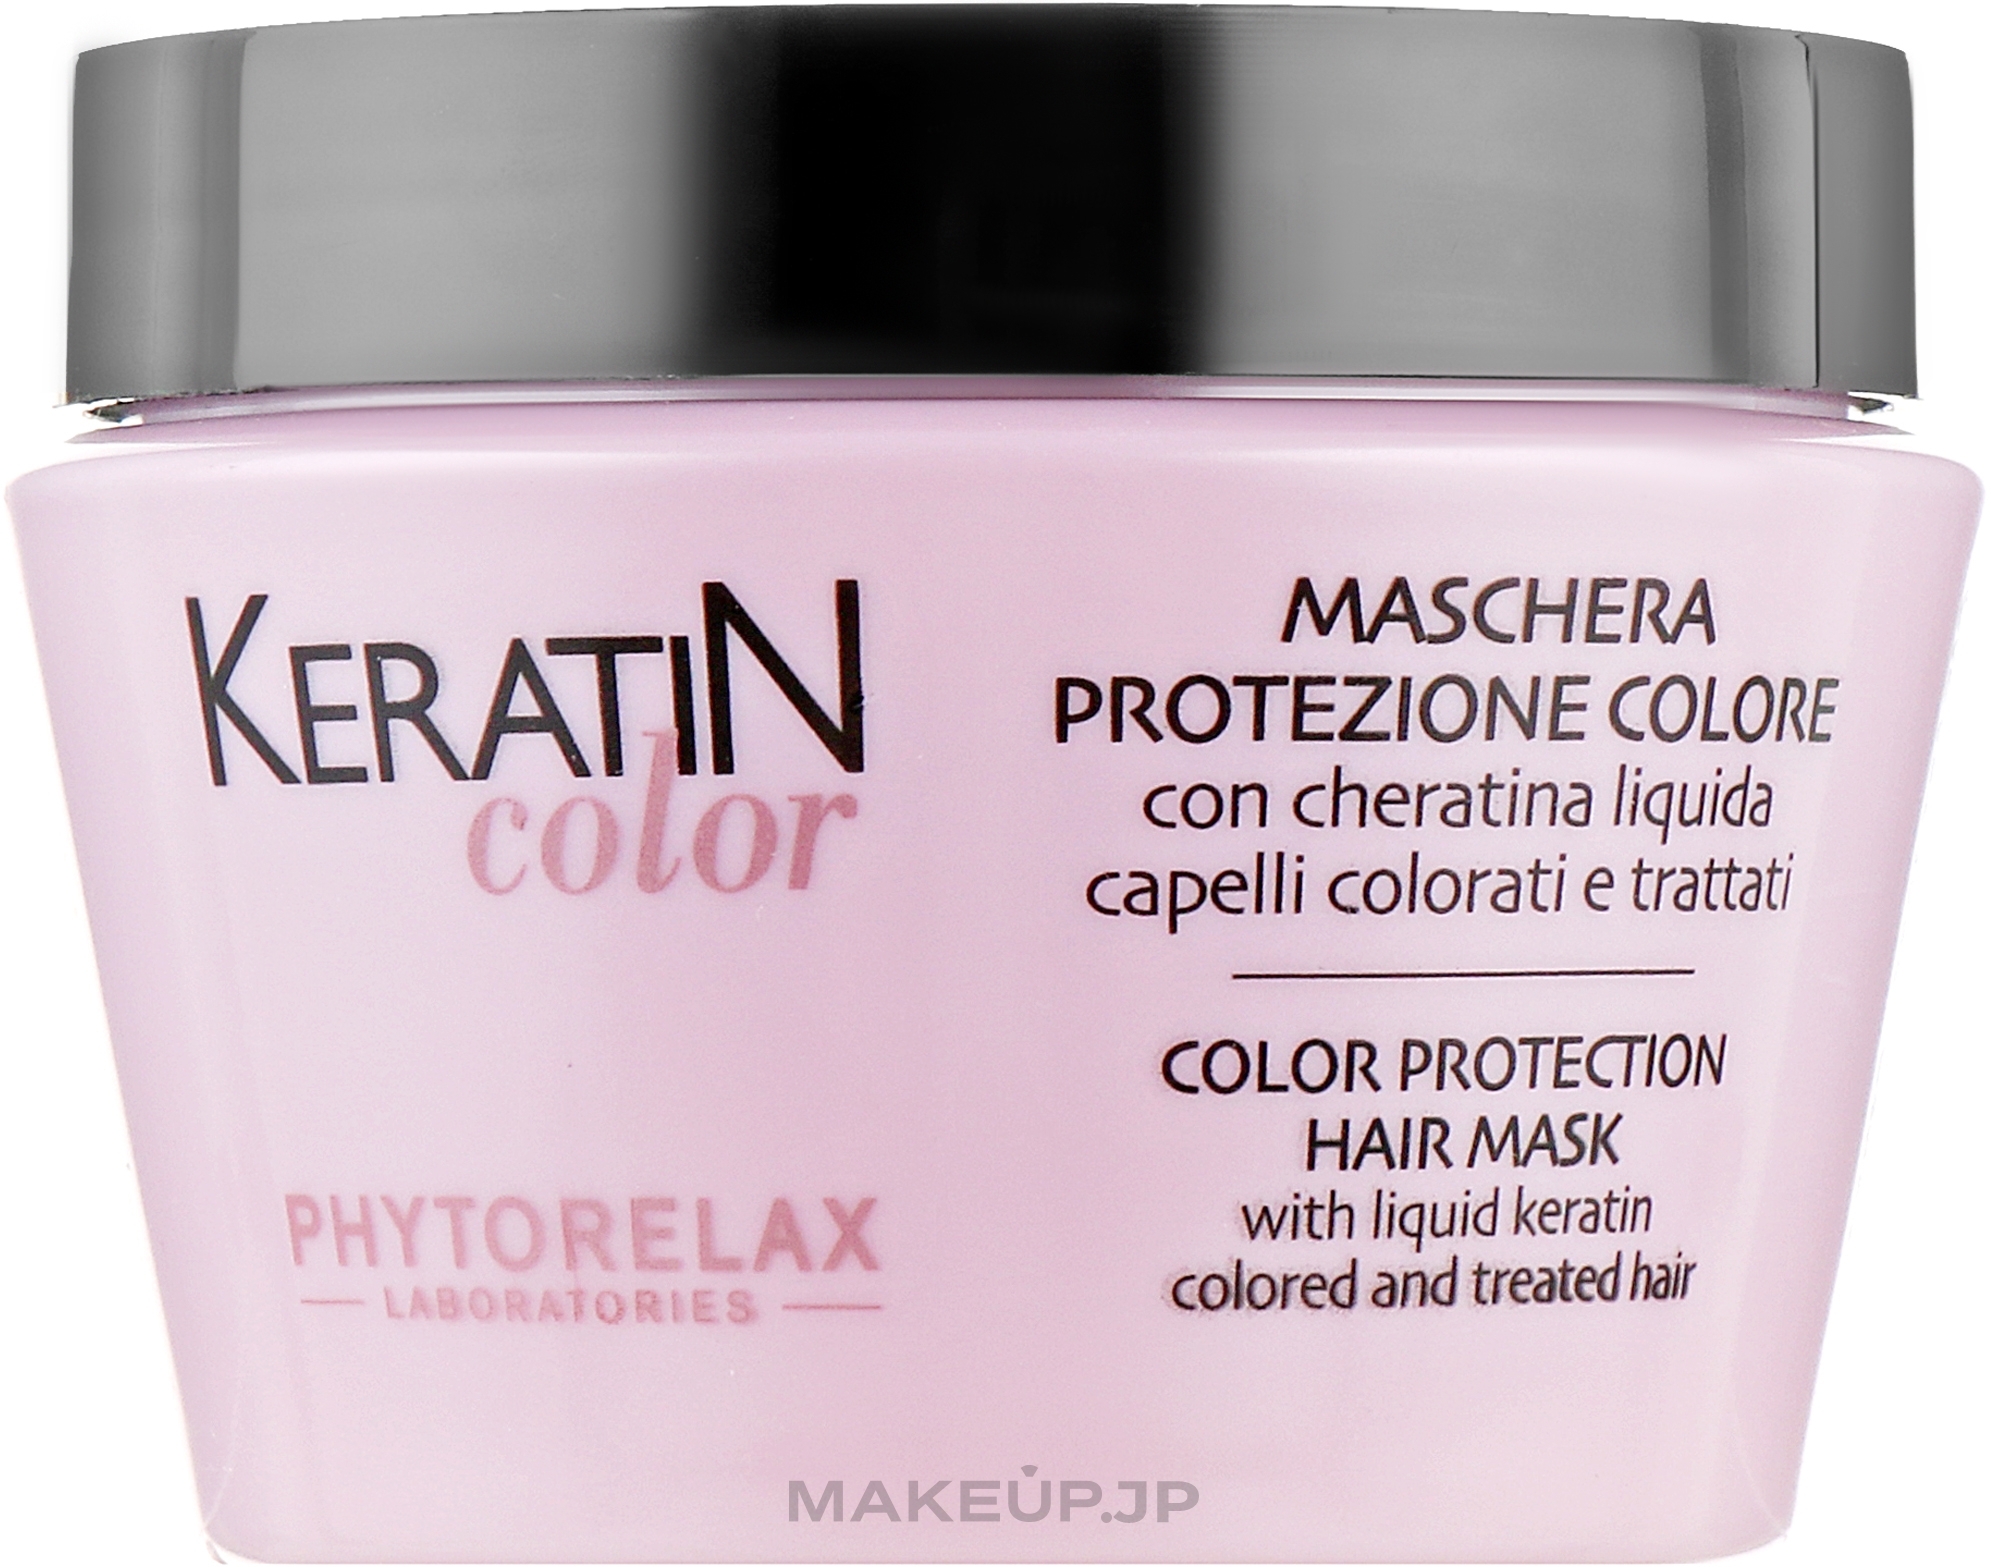 Mask for Colour-Treated Hair - Phytorelax Laboratories Keratin Color Protection Hair Mask — photo 250 ml